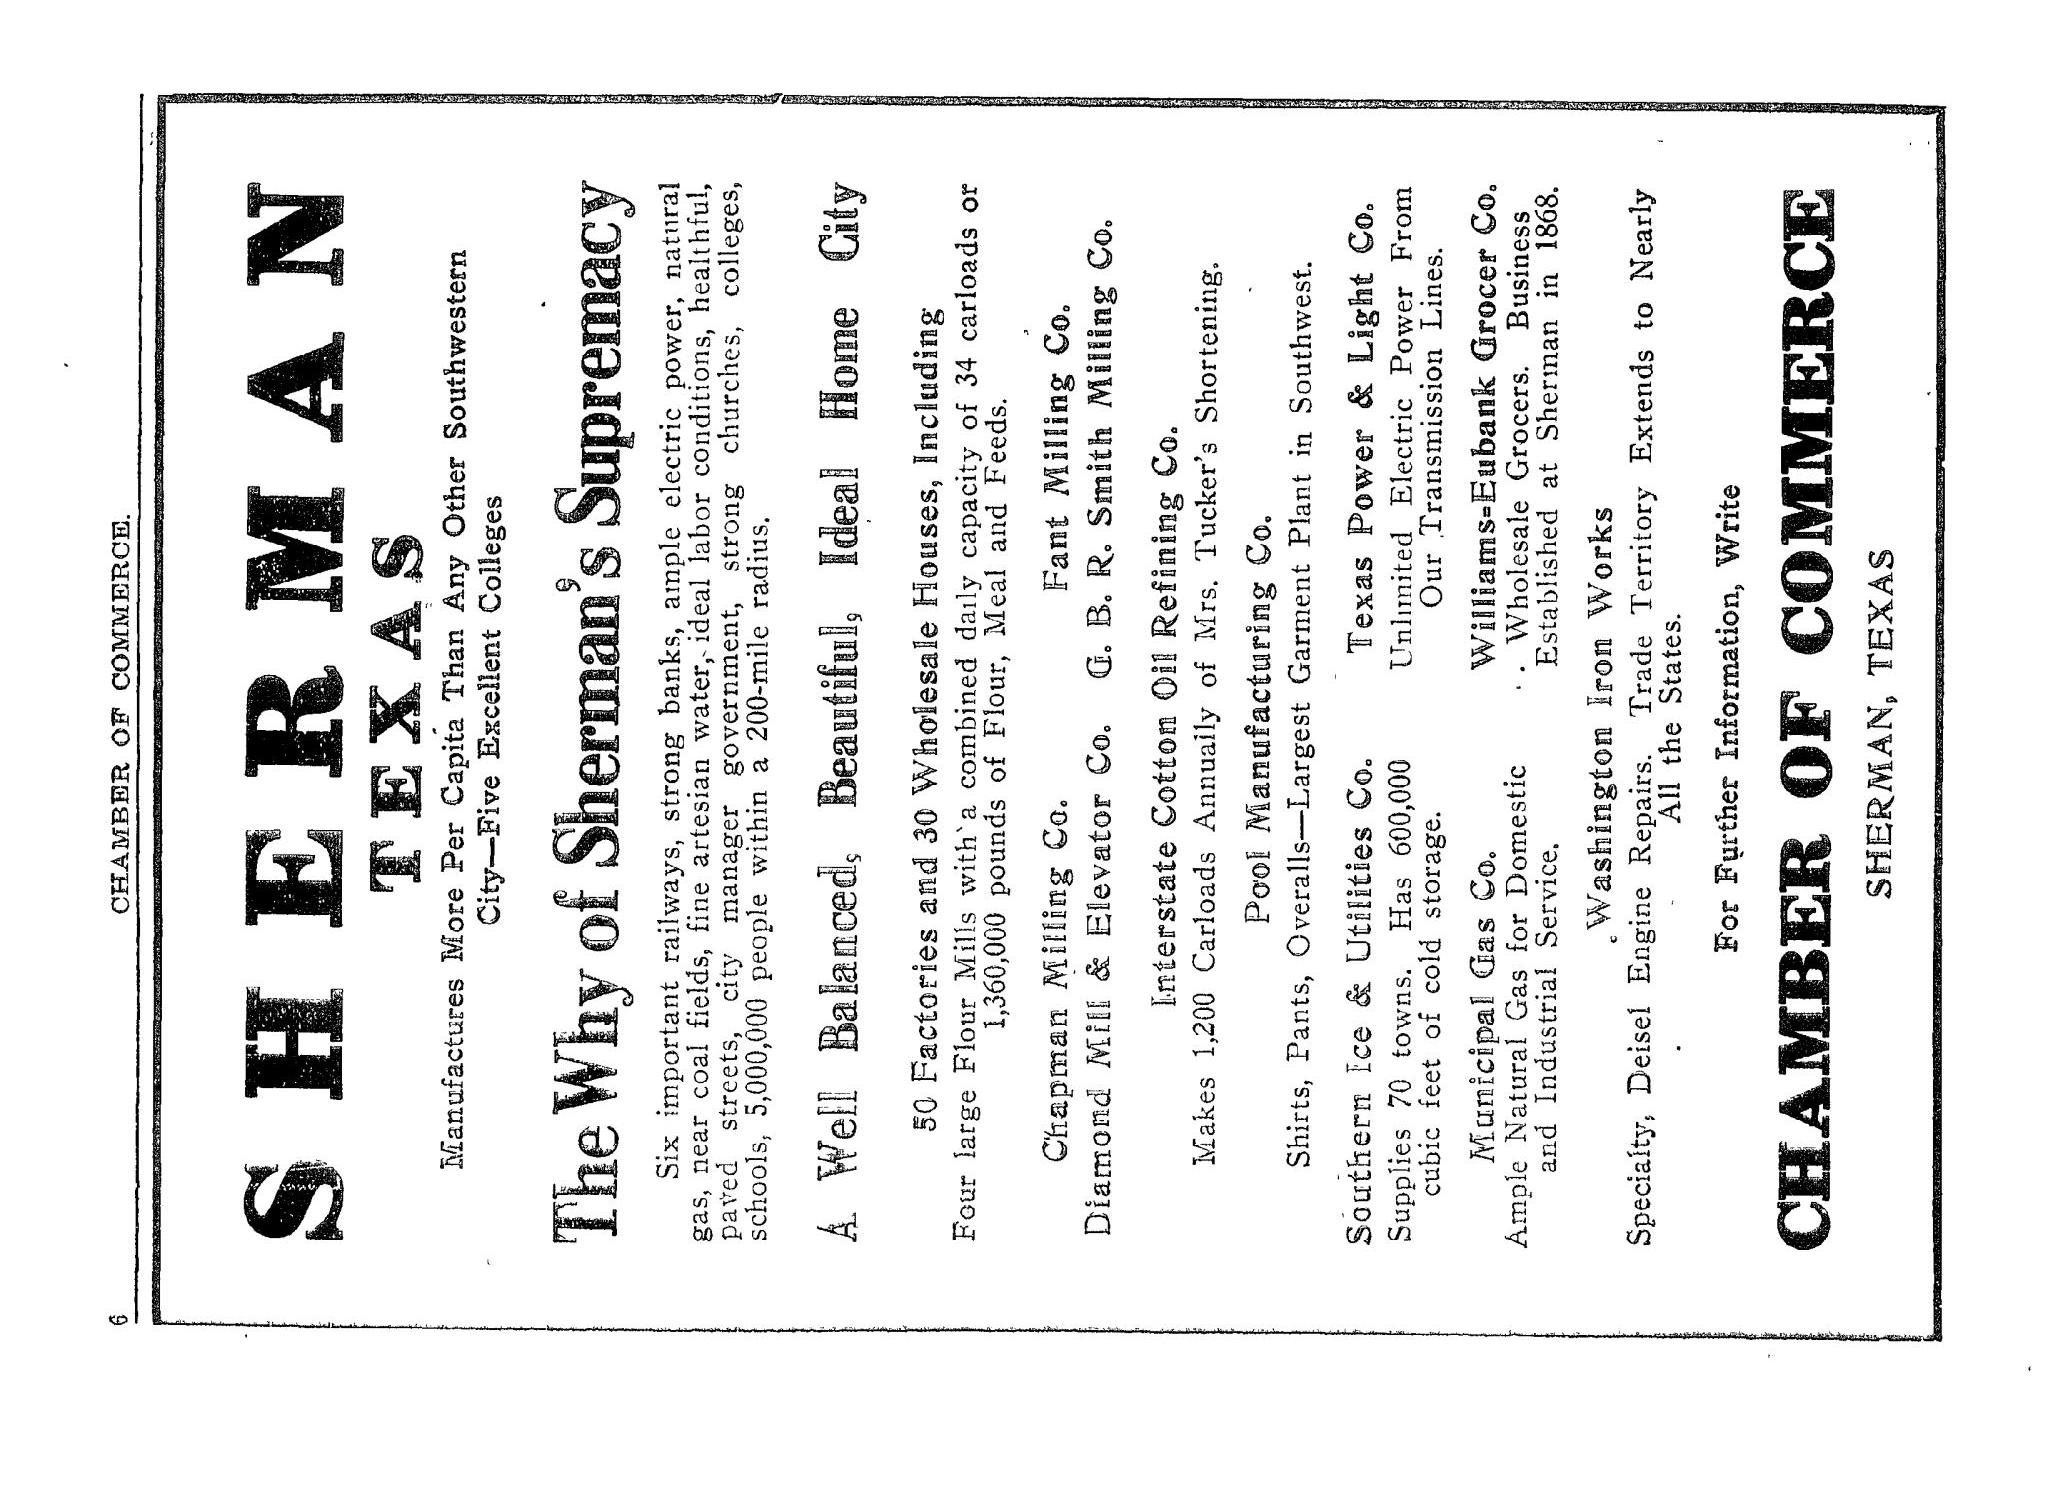 1927 The Texas Almanac and State Industrial Guide
                                                
                                                    6
                                                